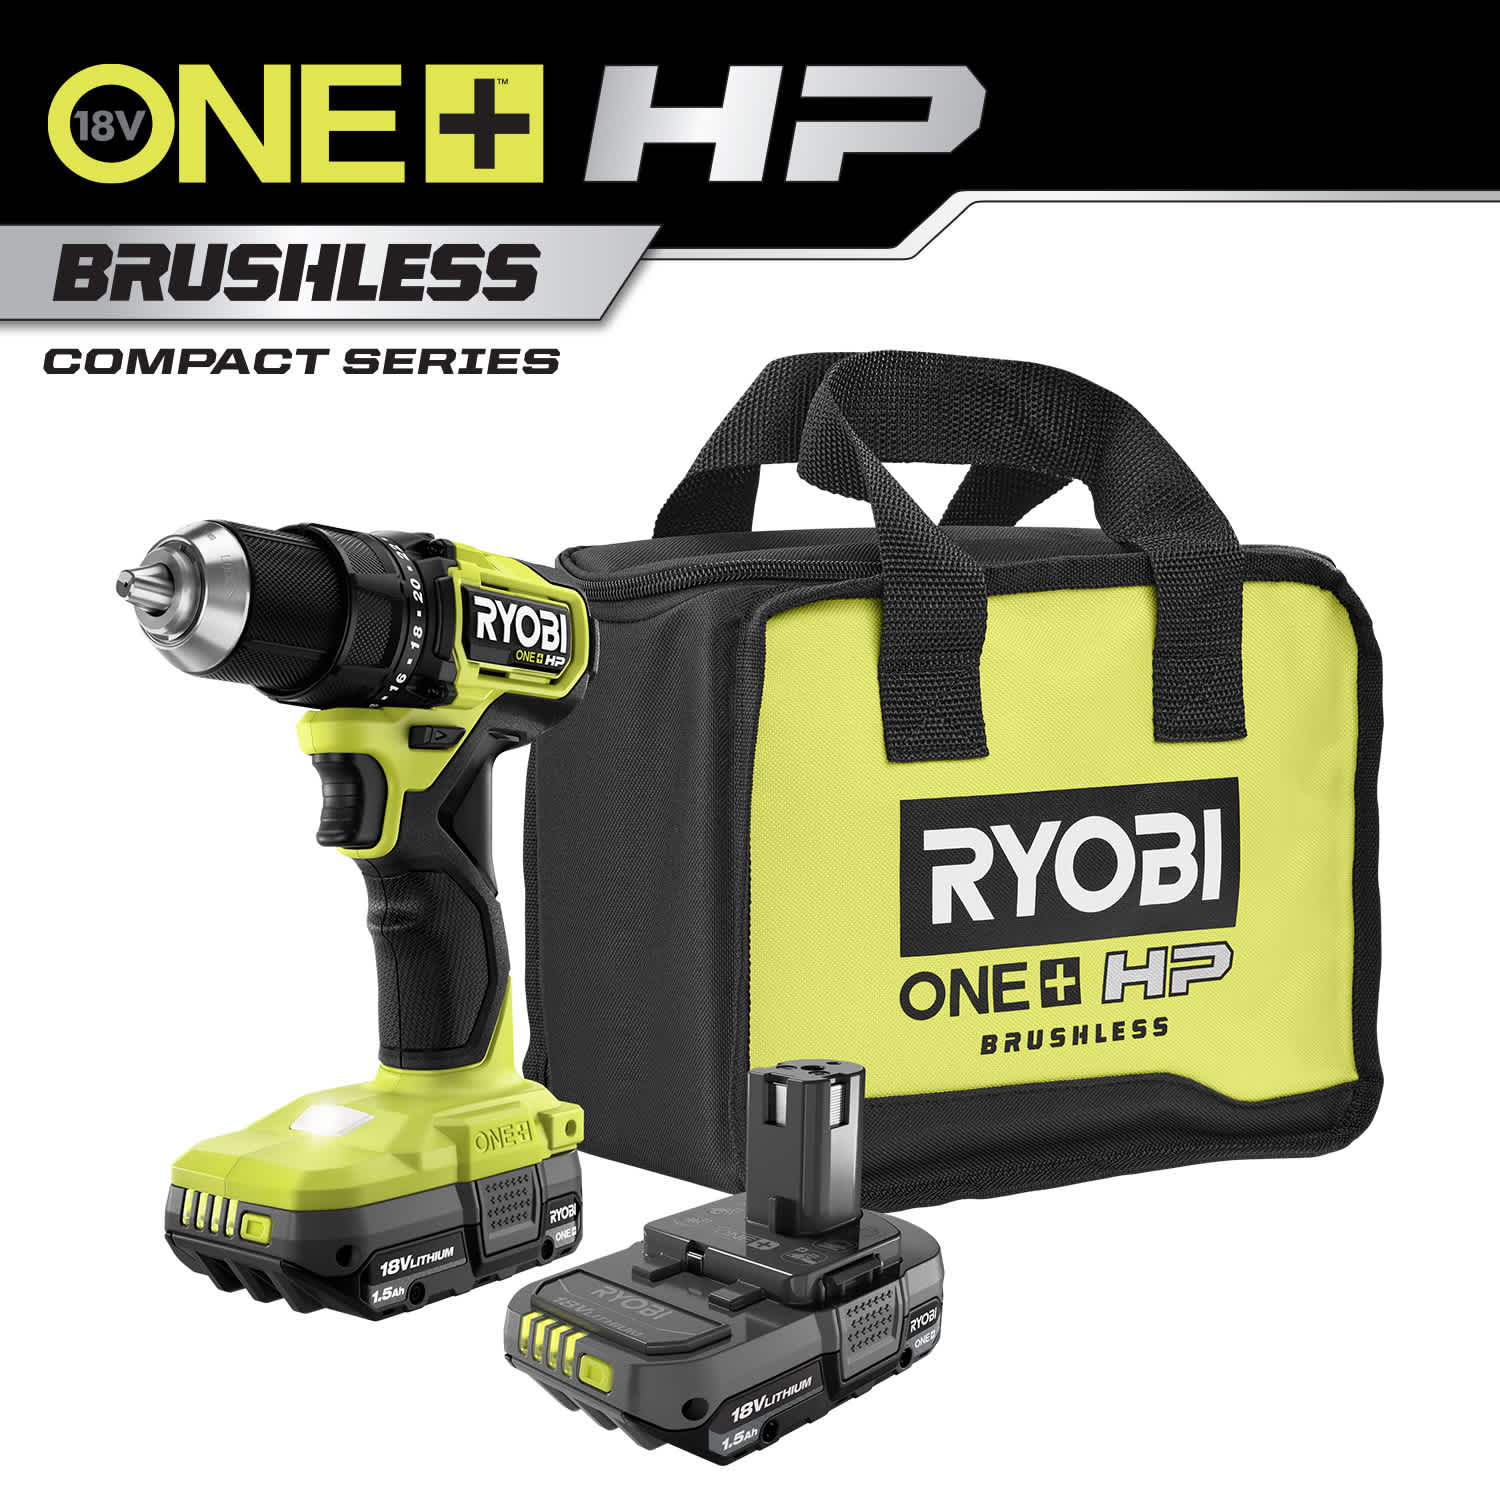 Feature Image for 18V ONE+ HP Compact Brushless 1/2" Drill/Driver Kit.